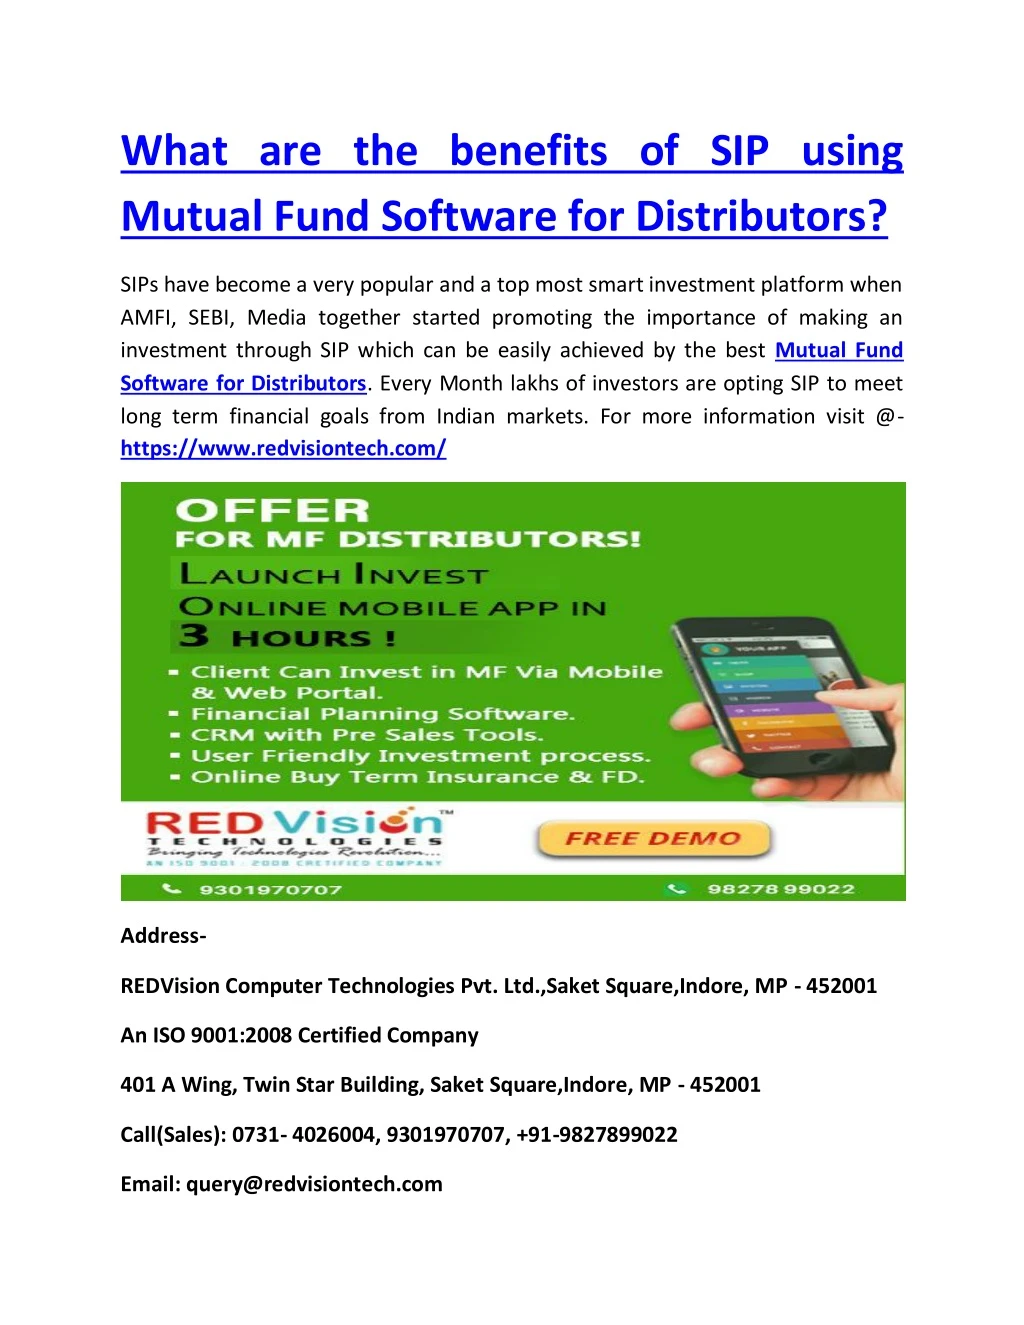 what are the benefits of sip using mutual fund